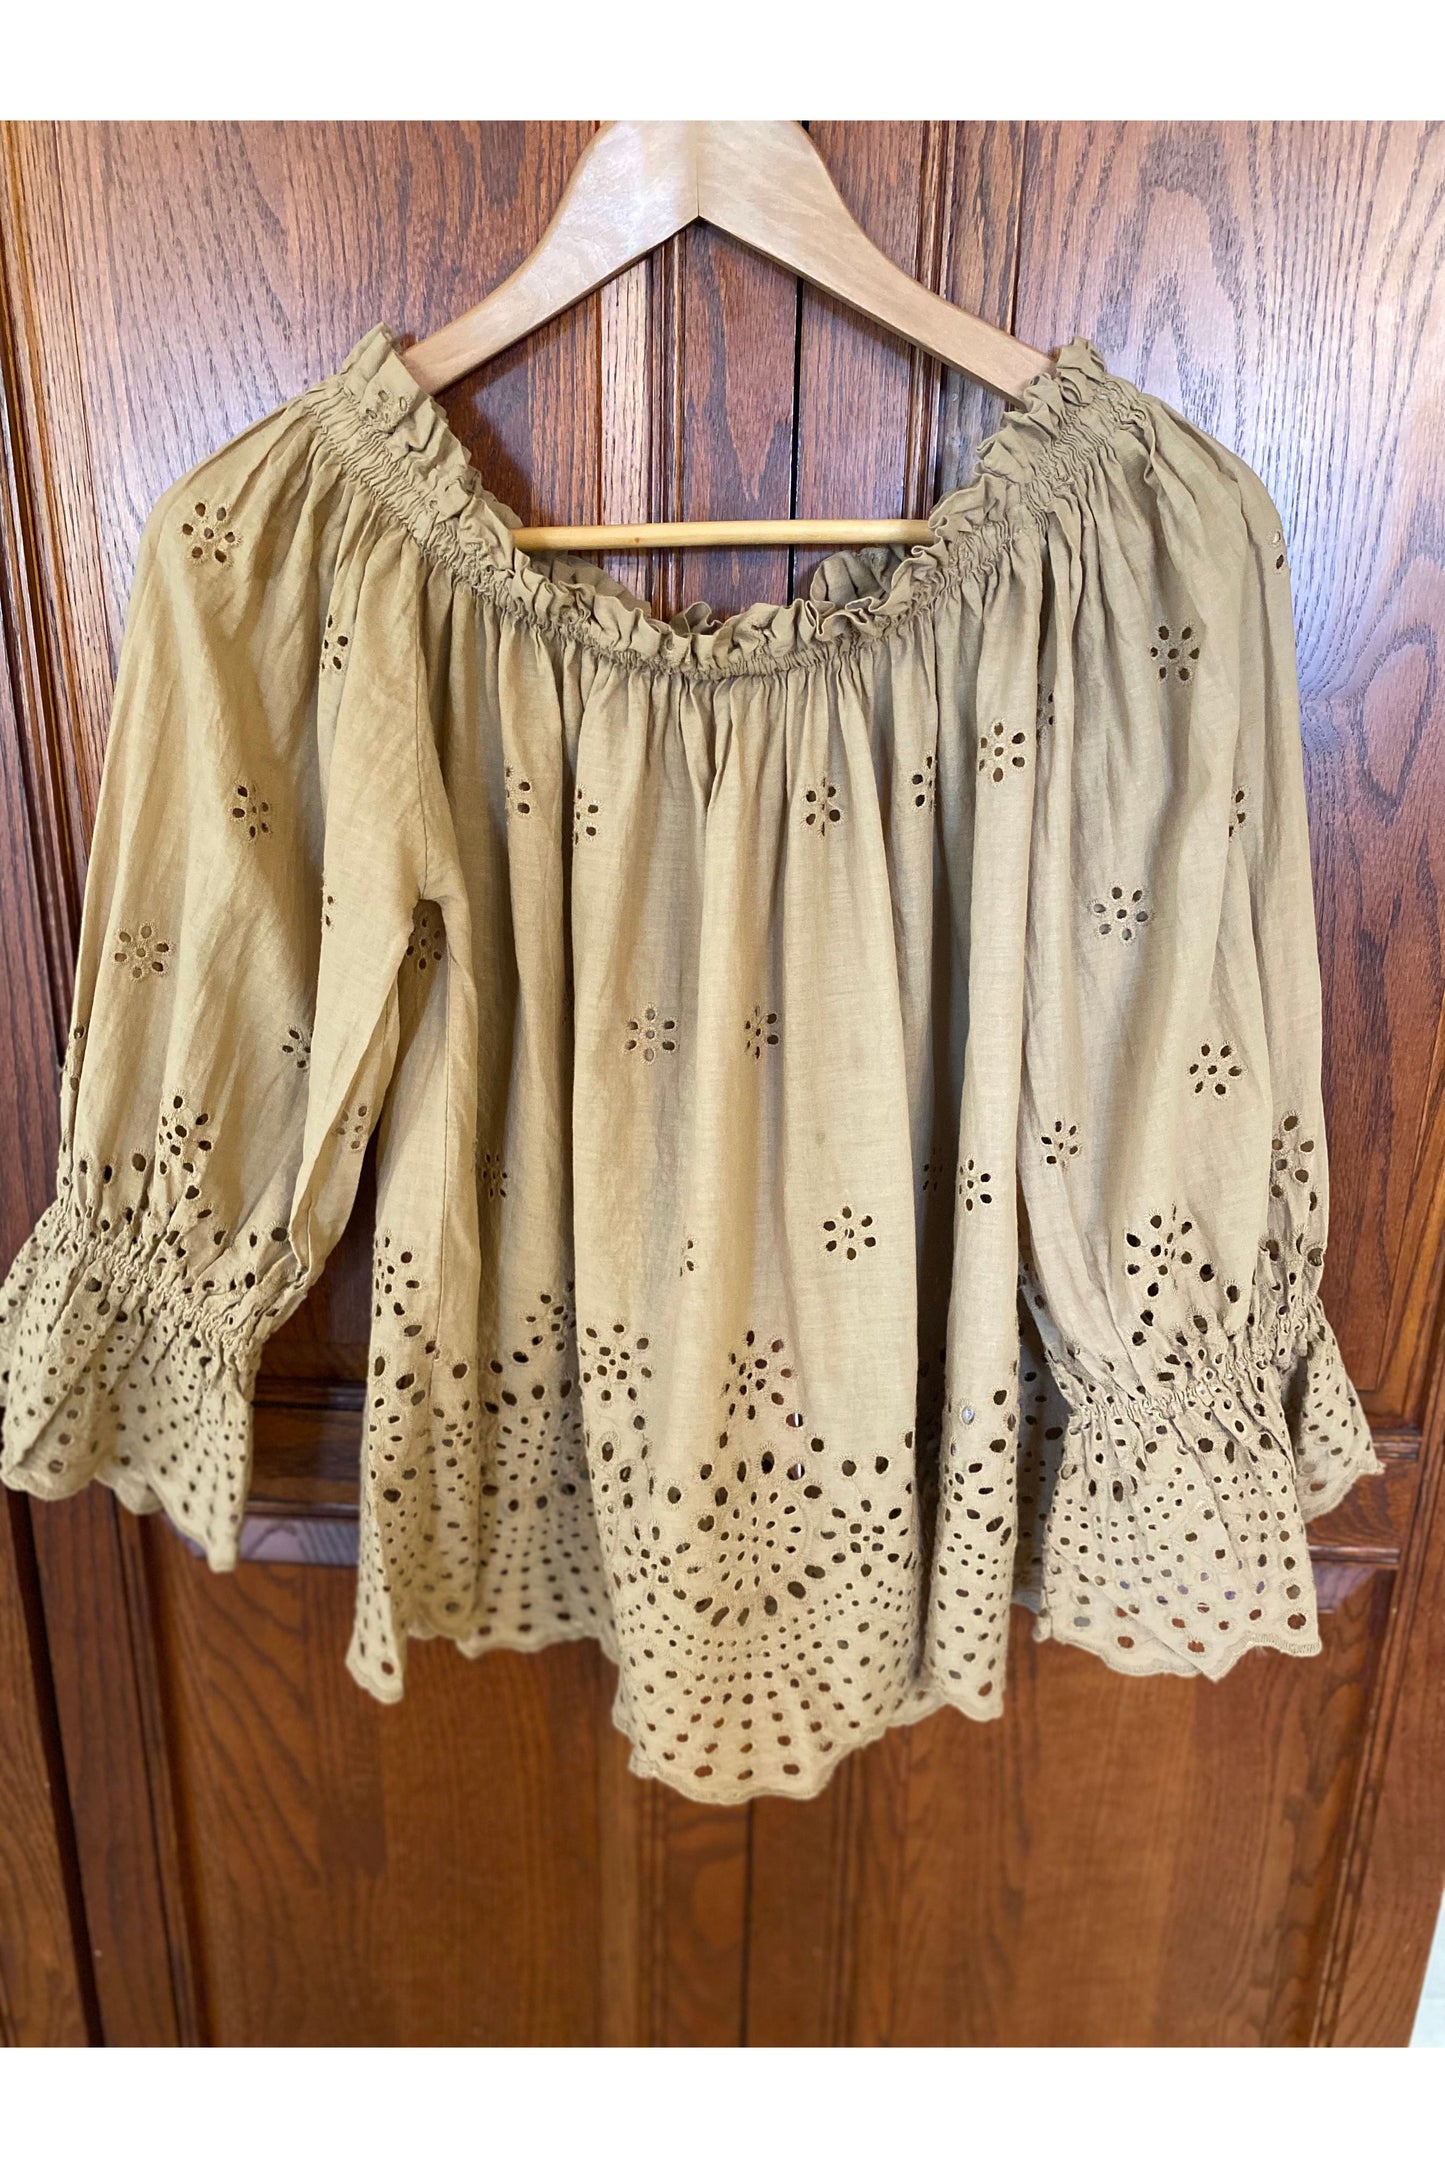 Scandal - "Buttercup" - Off Shoulder Top - in TAUPE